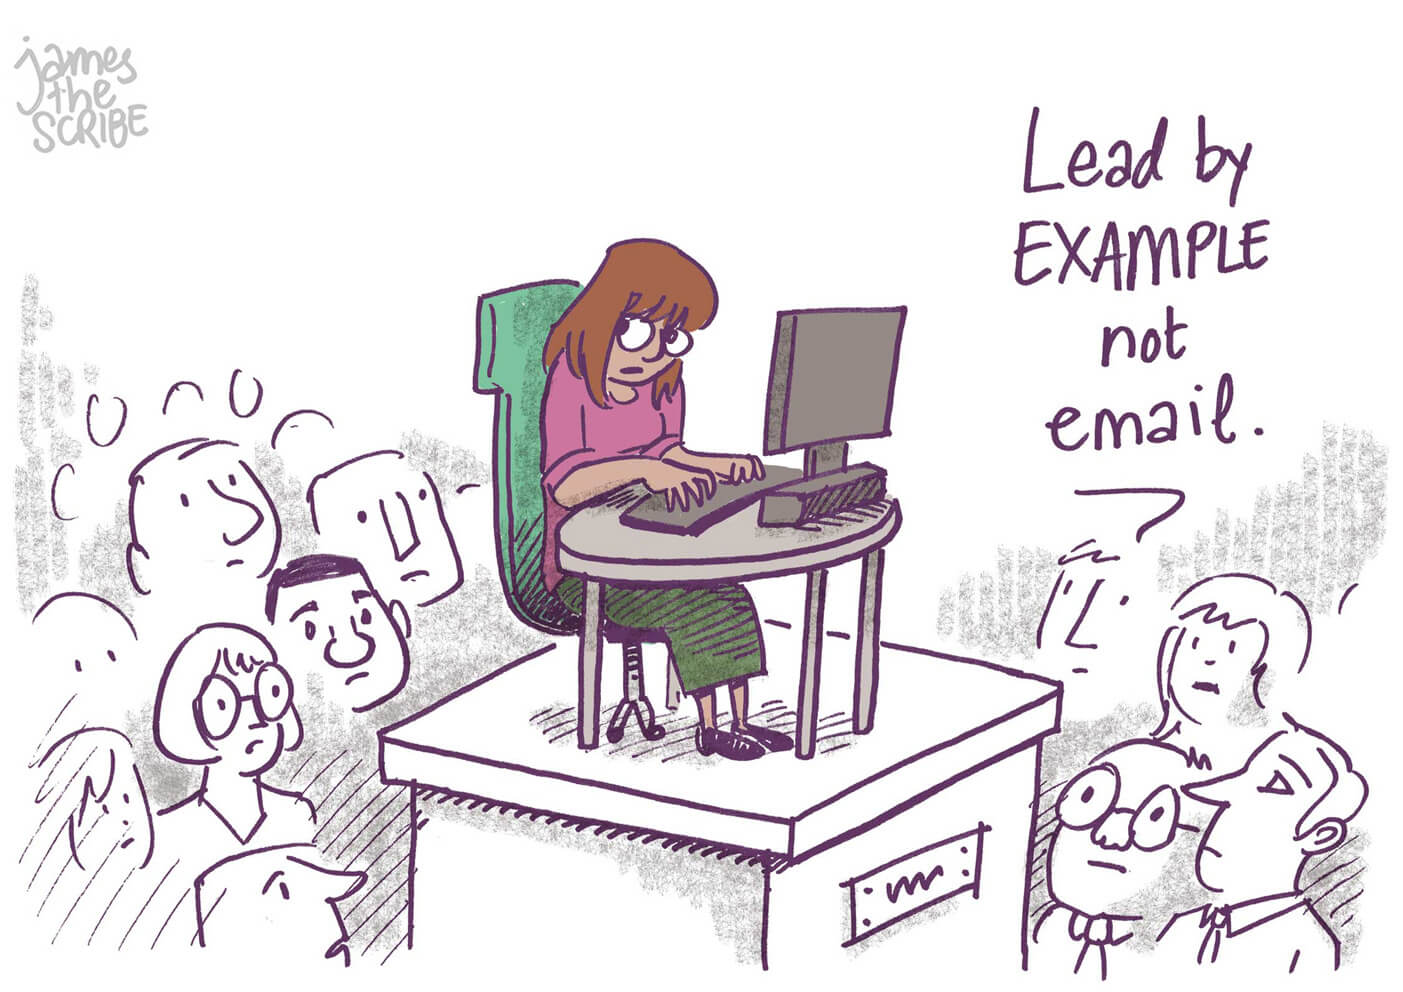 17_lead-by-example-not-email.jpg